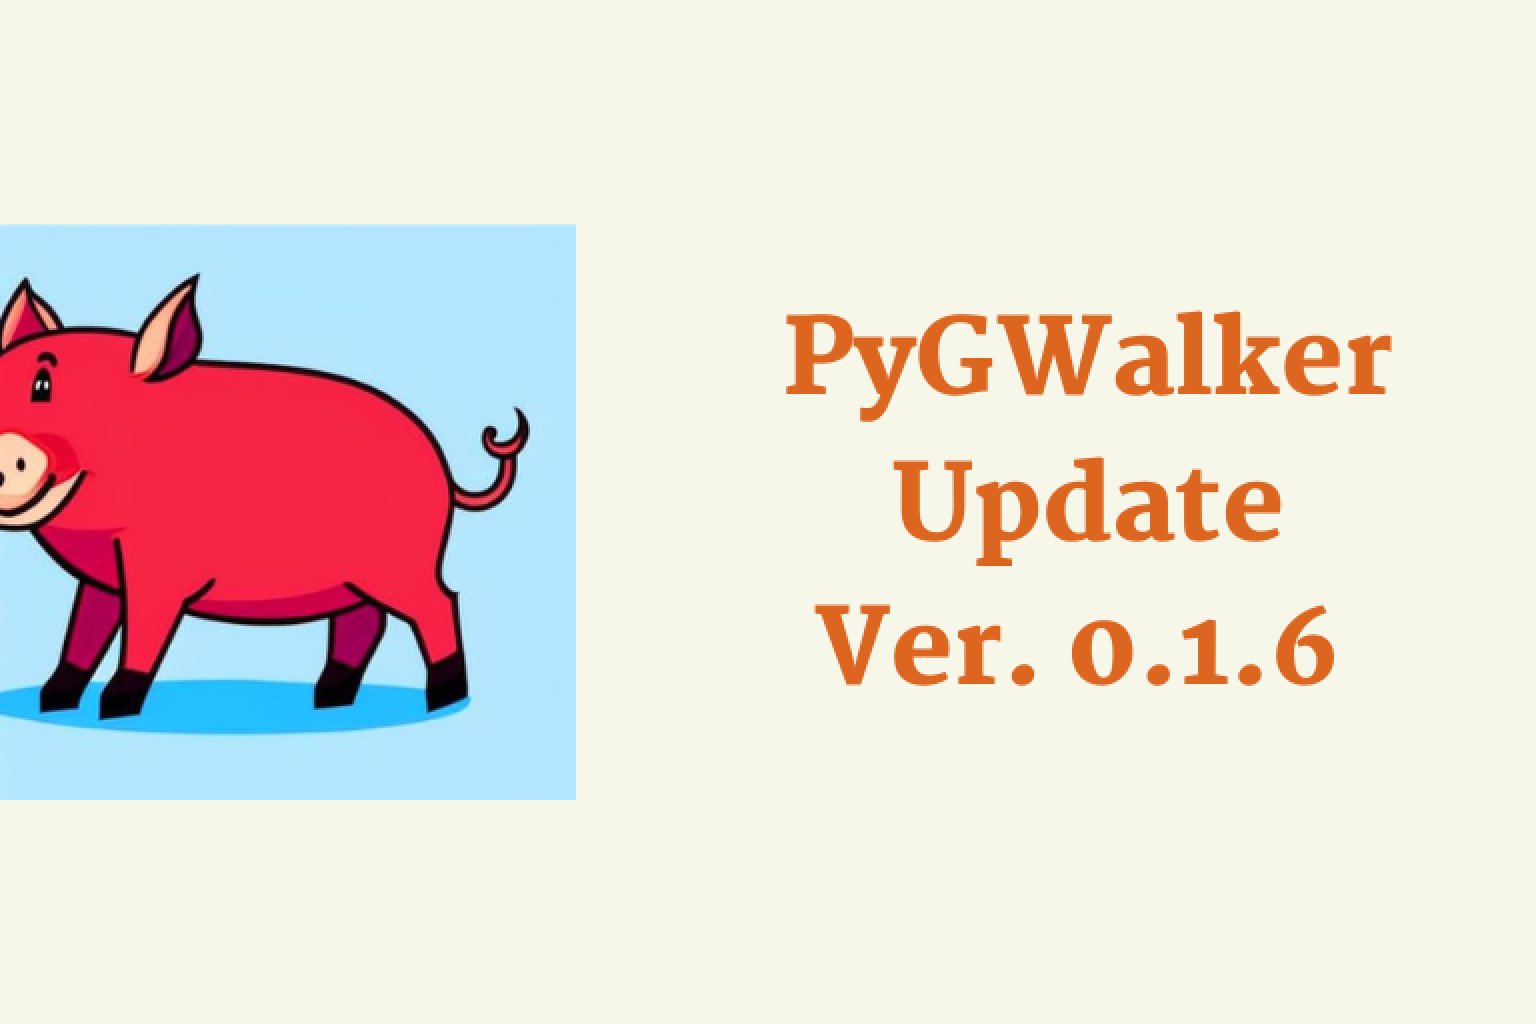 With the 0.1.6. Release for PyGWalker, you can easily turn your Pandas or Polars Dataframe into Data Visualizations with a tableau-alternative interface, and export the Visualzation to Code. You can also import the code back to PyGWalker at any time!